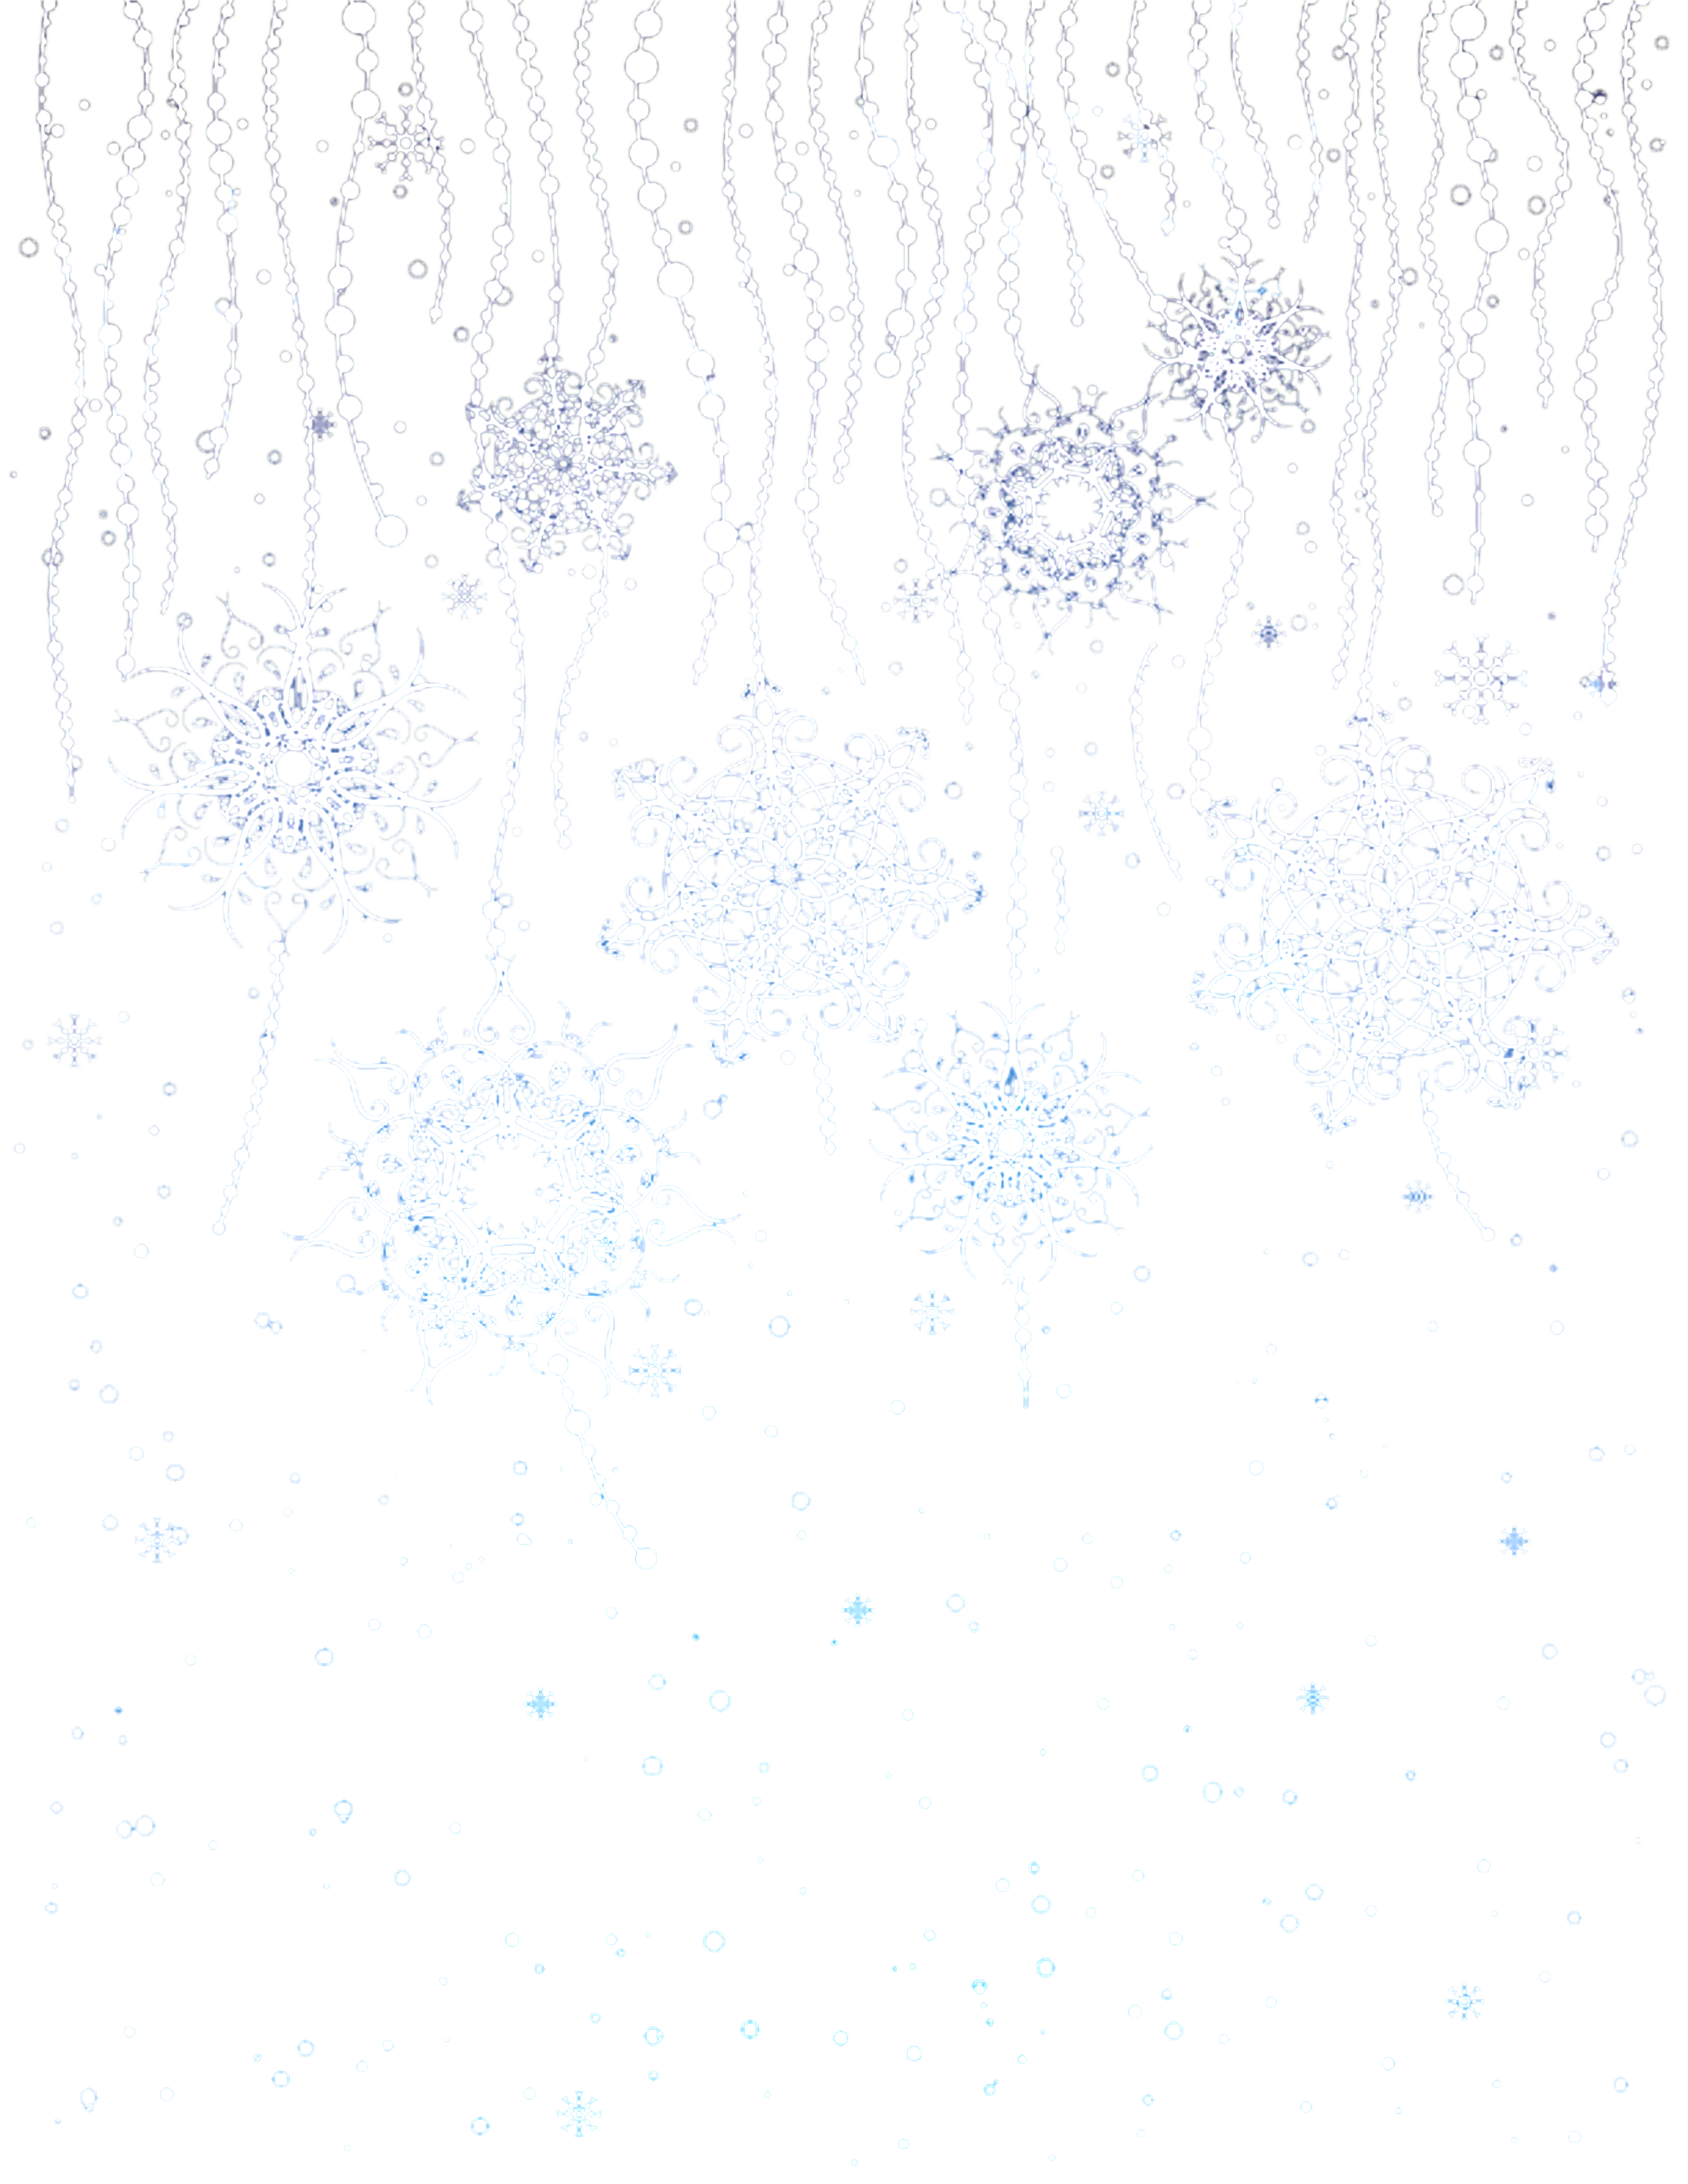 Download PNG image - Christmas Snowflake Transparent Images PNG 